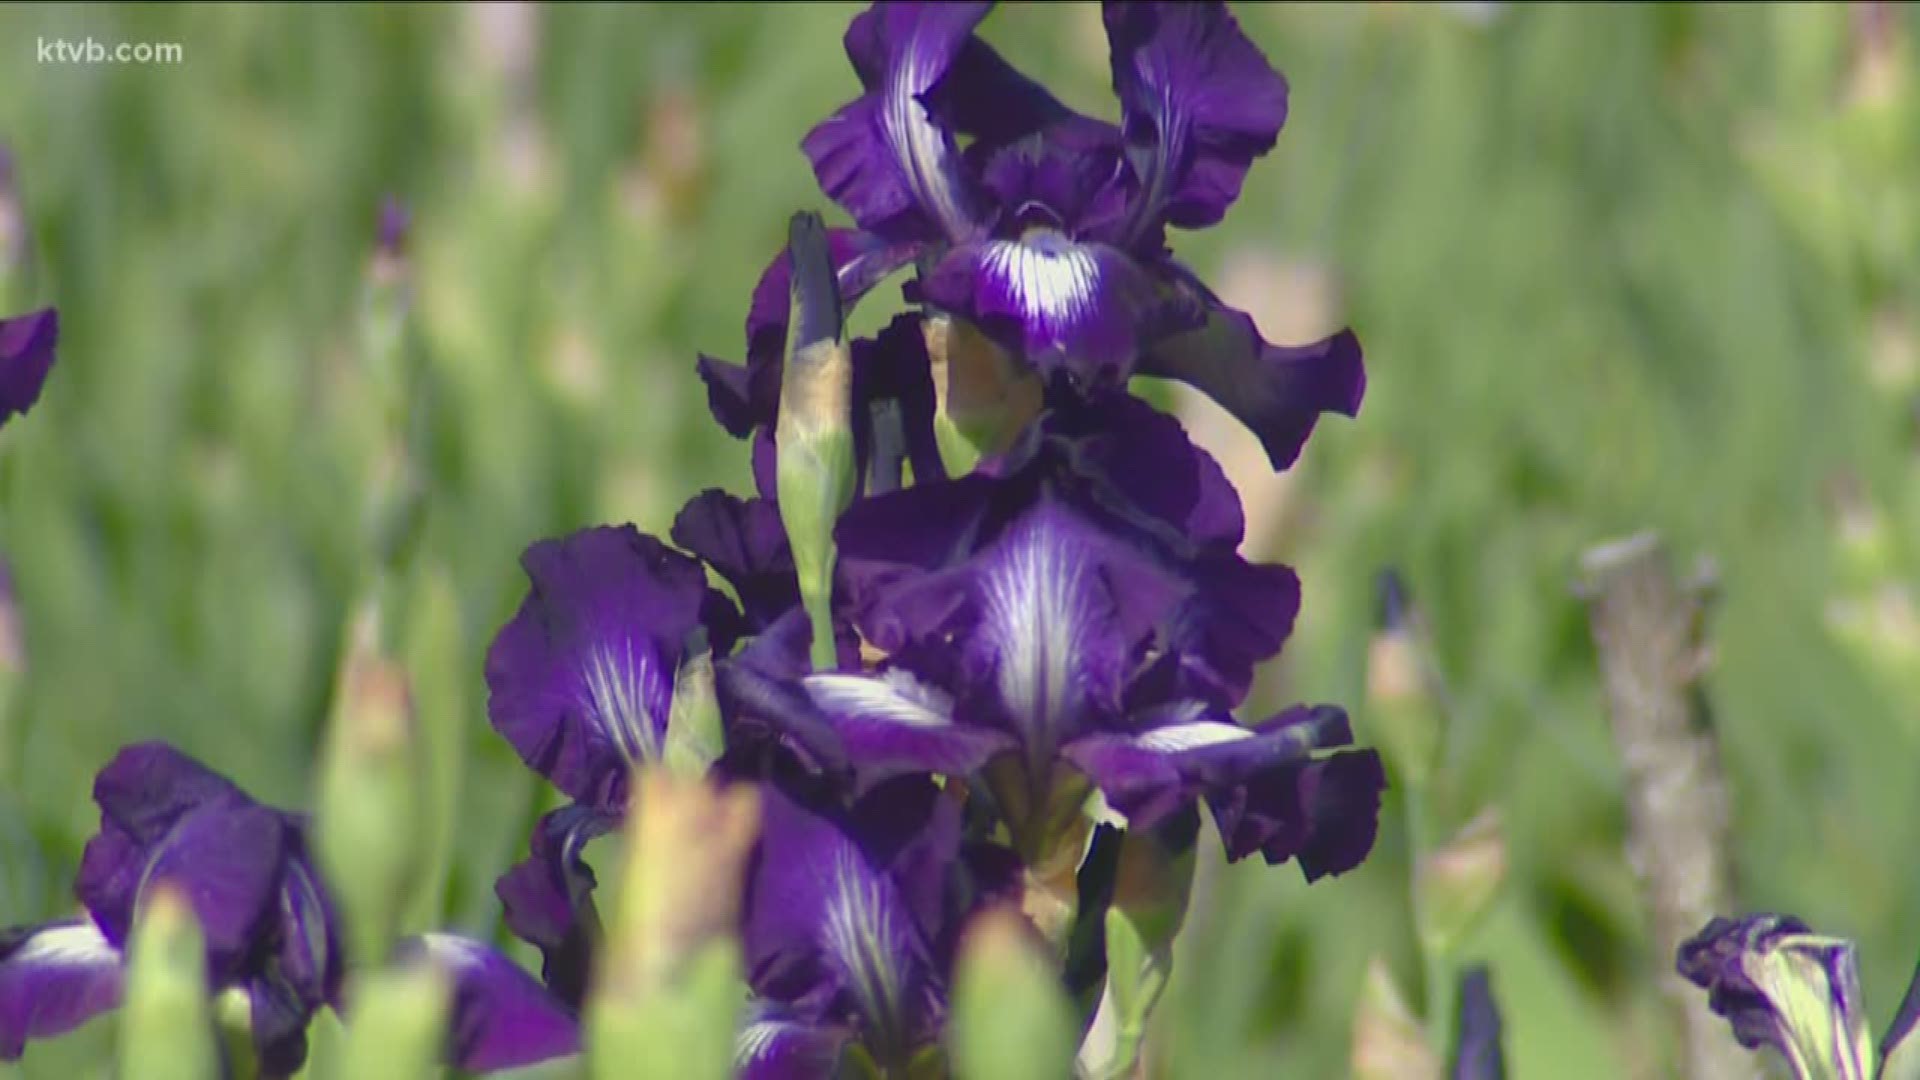 Jim Duthie takes us there and shows us a variety of irises.